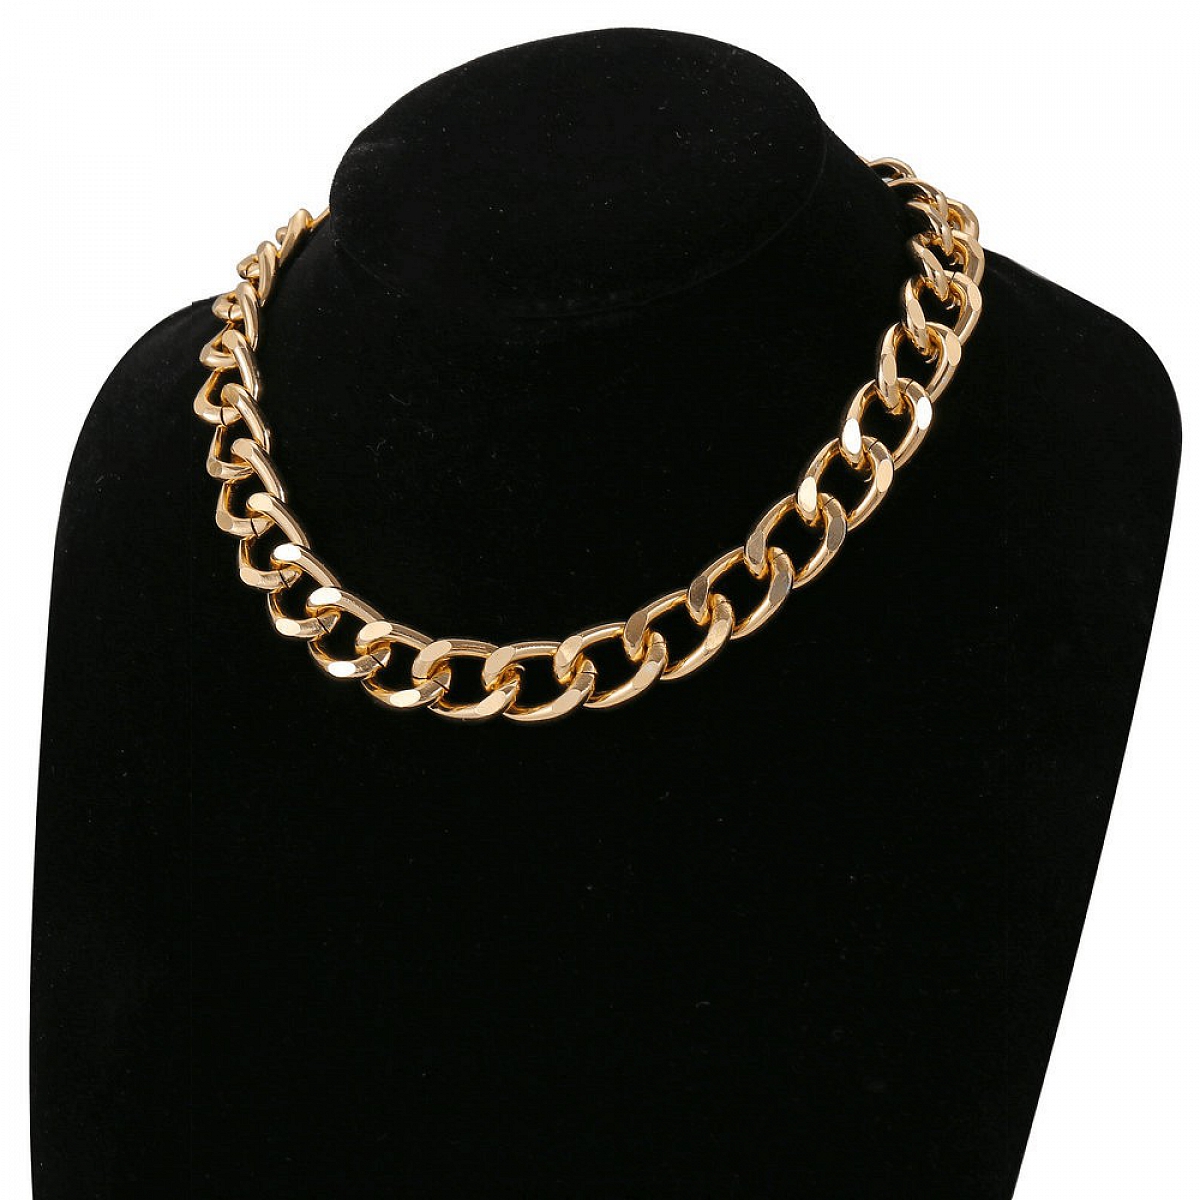 Vintage chunky chain necklace PWB064 - Necklace - PromiseIn